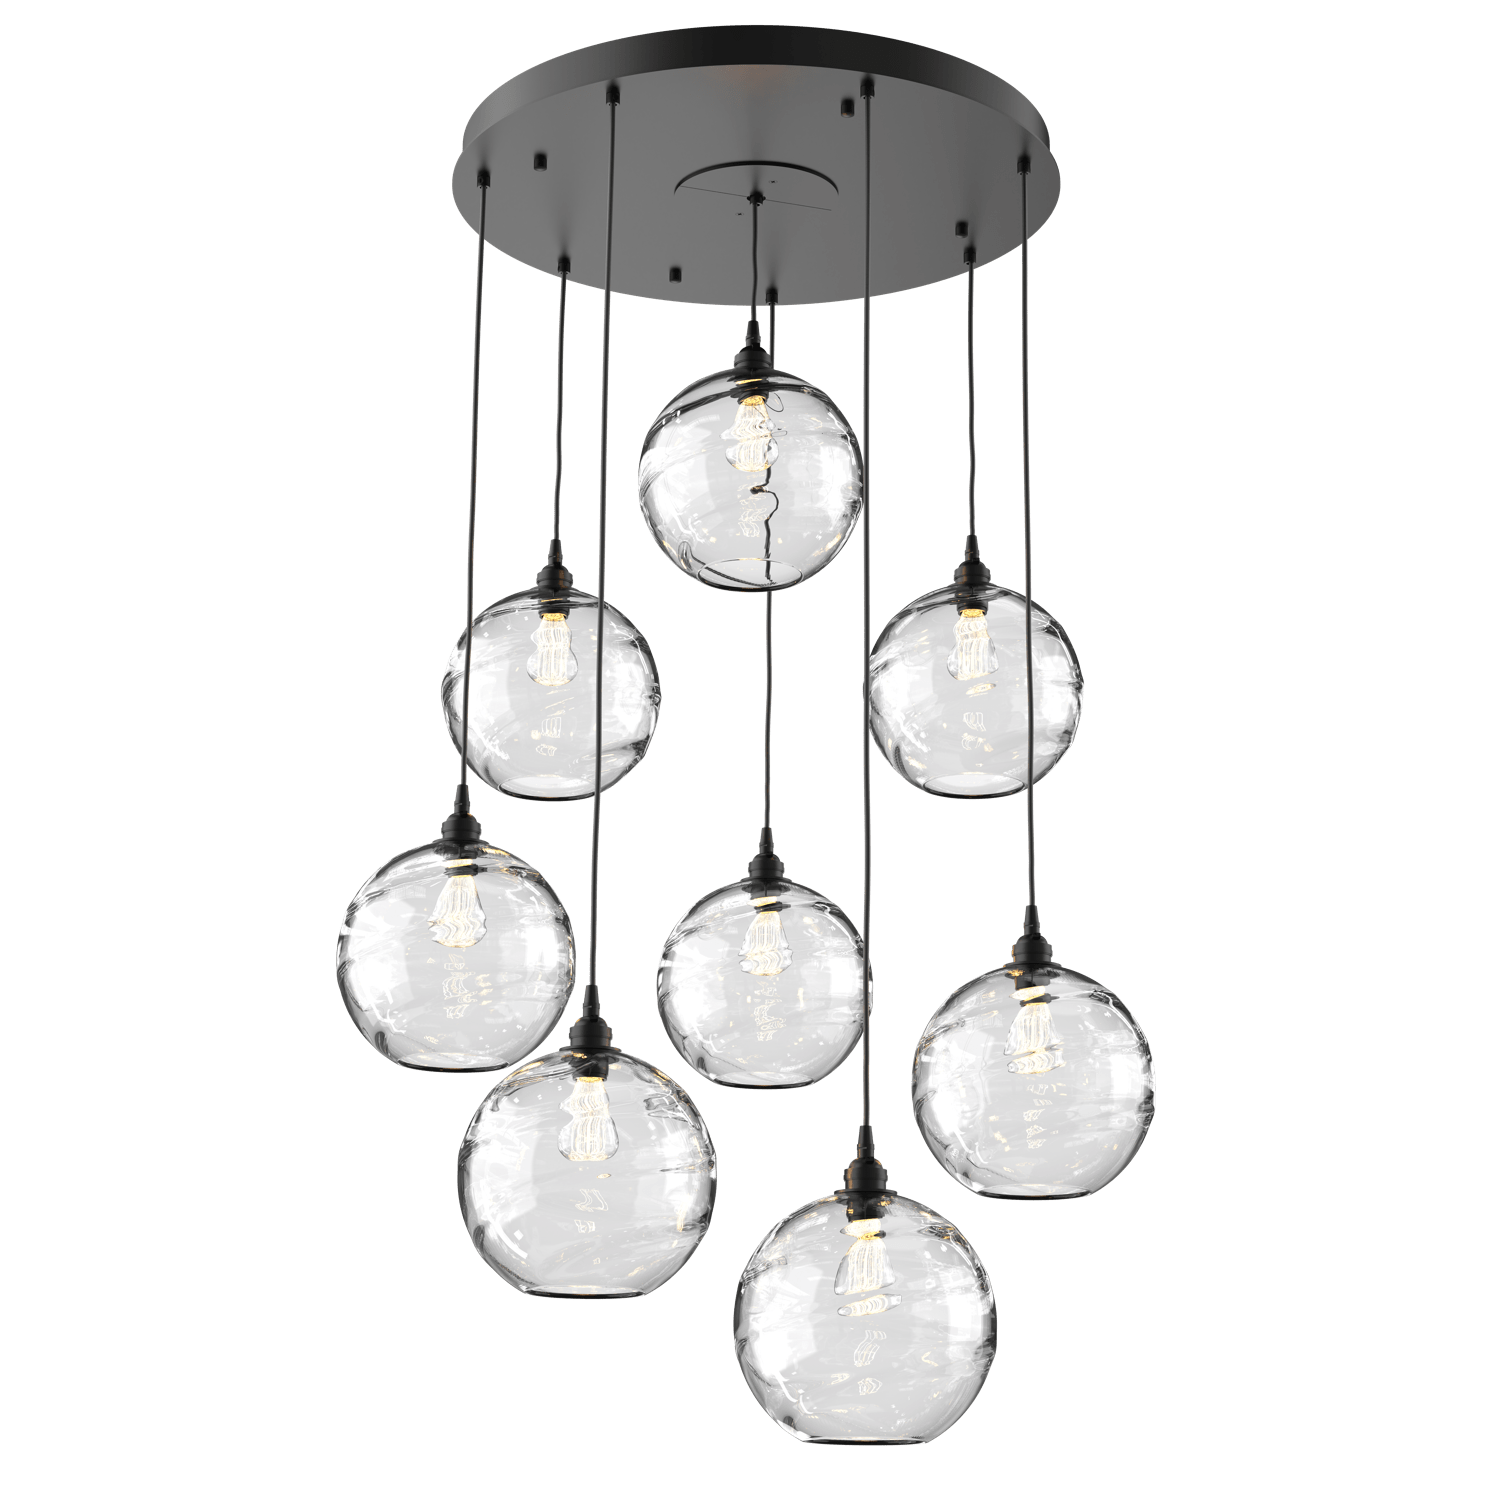 CHB0047-08-MB-OC-Hammerton-Studio-Optic-Blown-Glass-Terra-8-light-round-pendant-chandelier-with-matte-black-finish-and-optic-clear-blown-glass-shades-and-incandescent-lamping